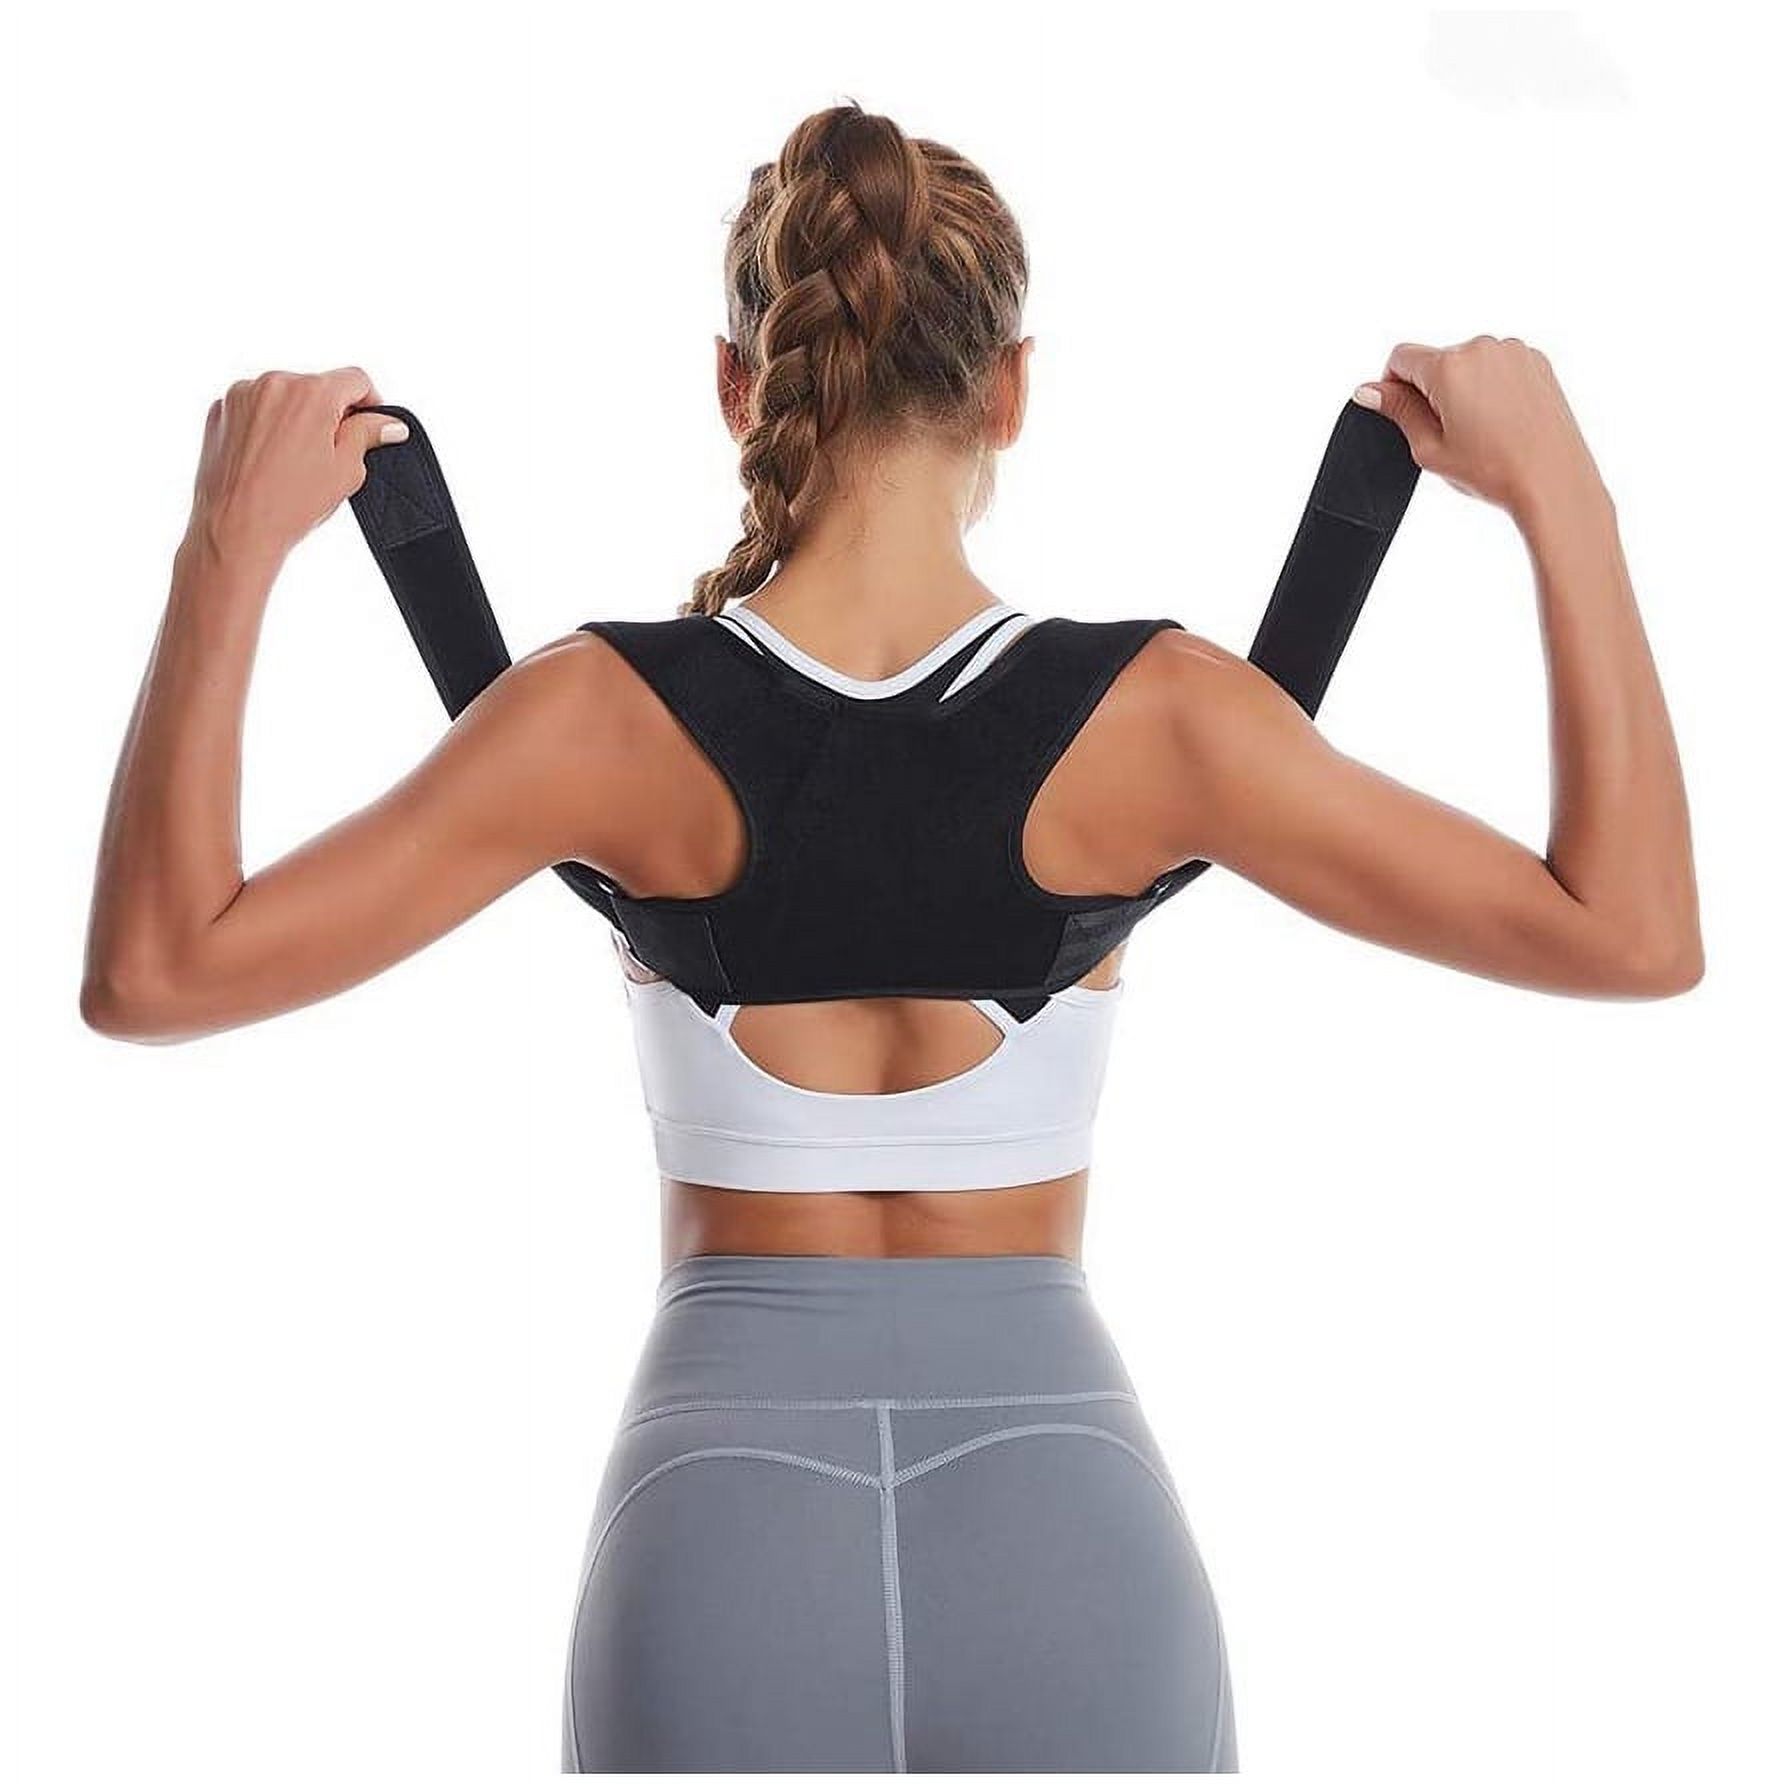 Posture Corrector for Women and Men - Adjustable Upper Back Brace - for Support and Providing Pain Relief from Neck,Back and Shoulder, Improve Eliminate Bad Posture for Correct Posture - image 1 of 6